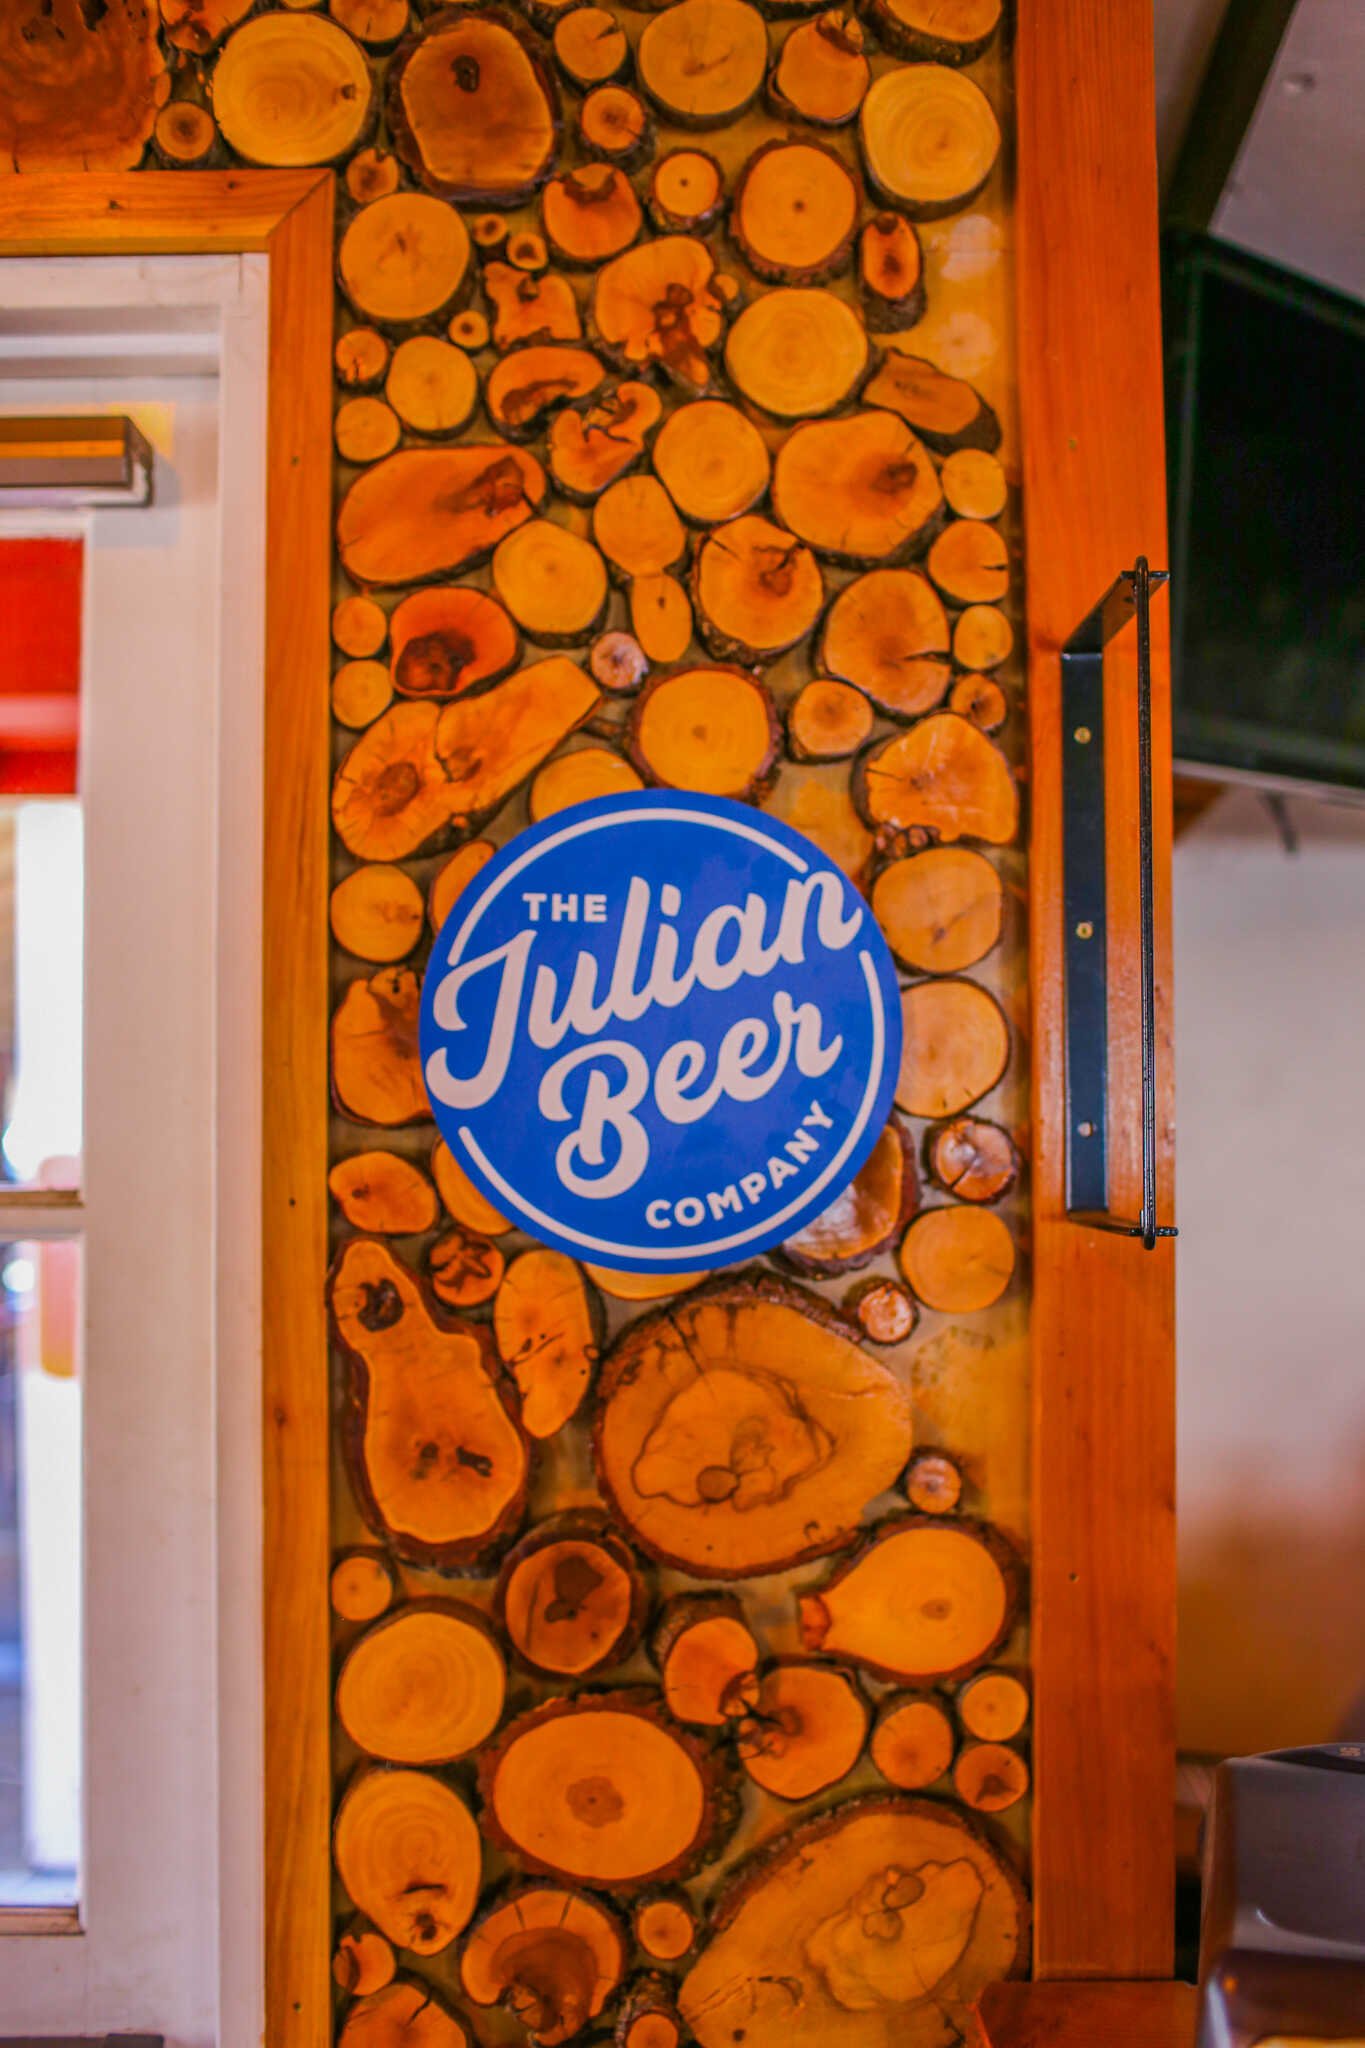 The Complete Travel Guide to Julian, California - Julian Beer Company Barn and Brewery.